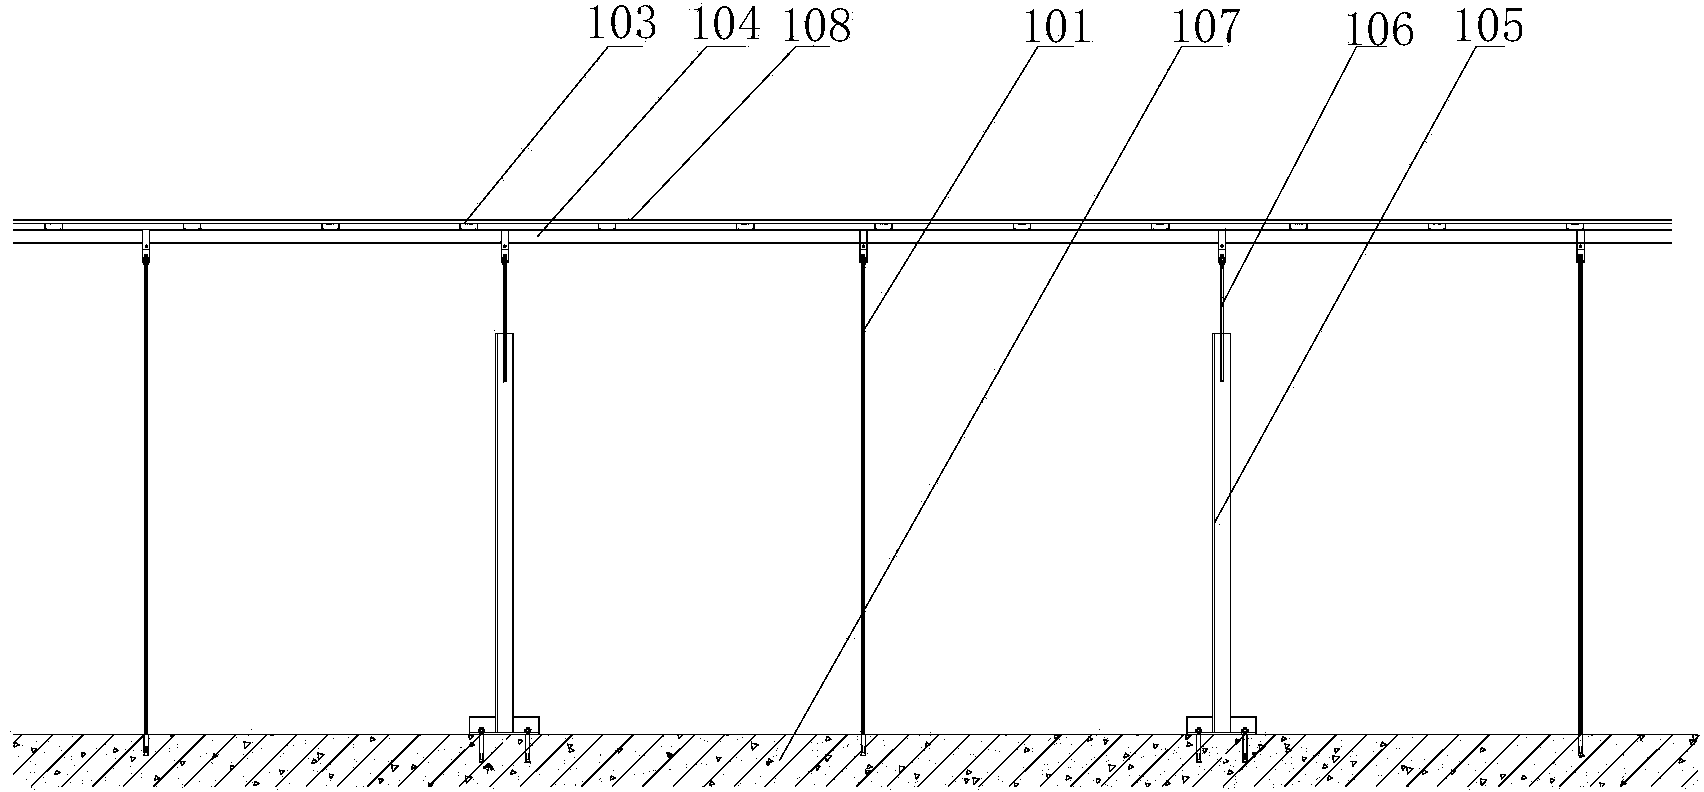 Test method for measuring ultimate bearing capacity of ceiling support system